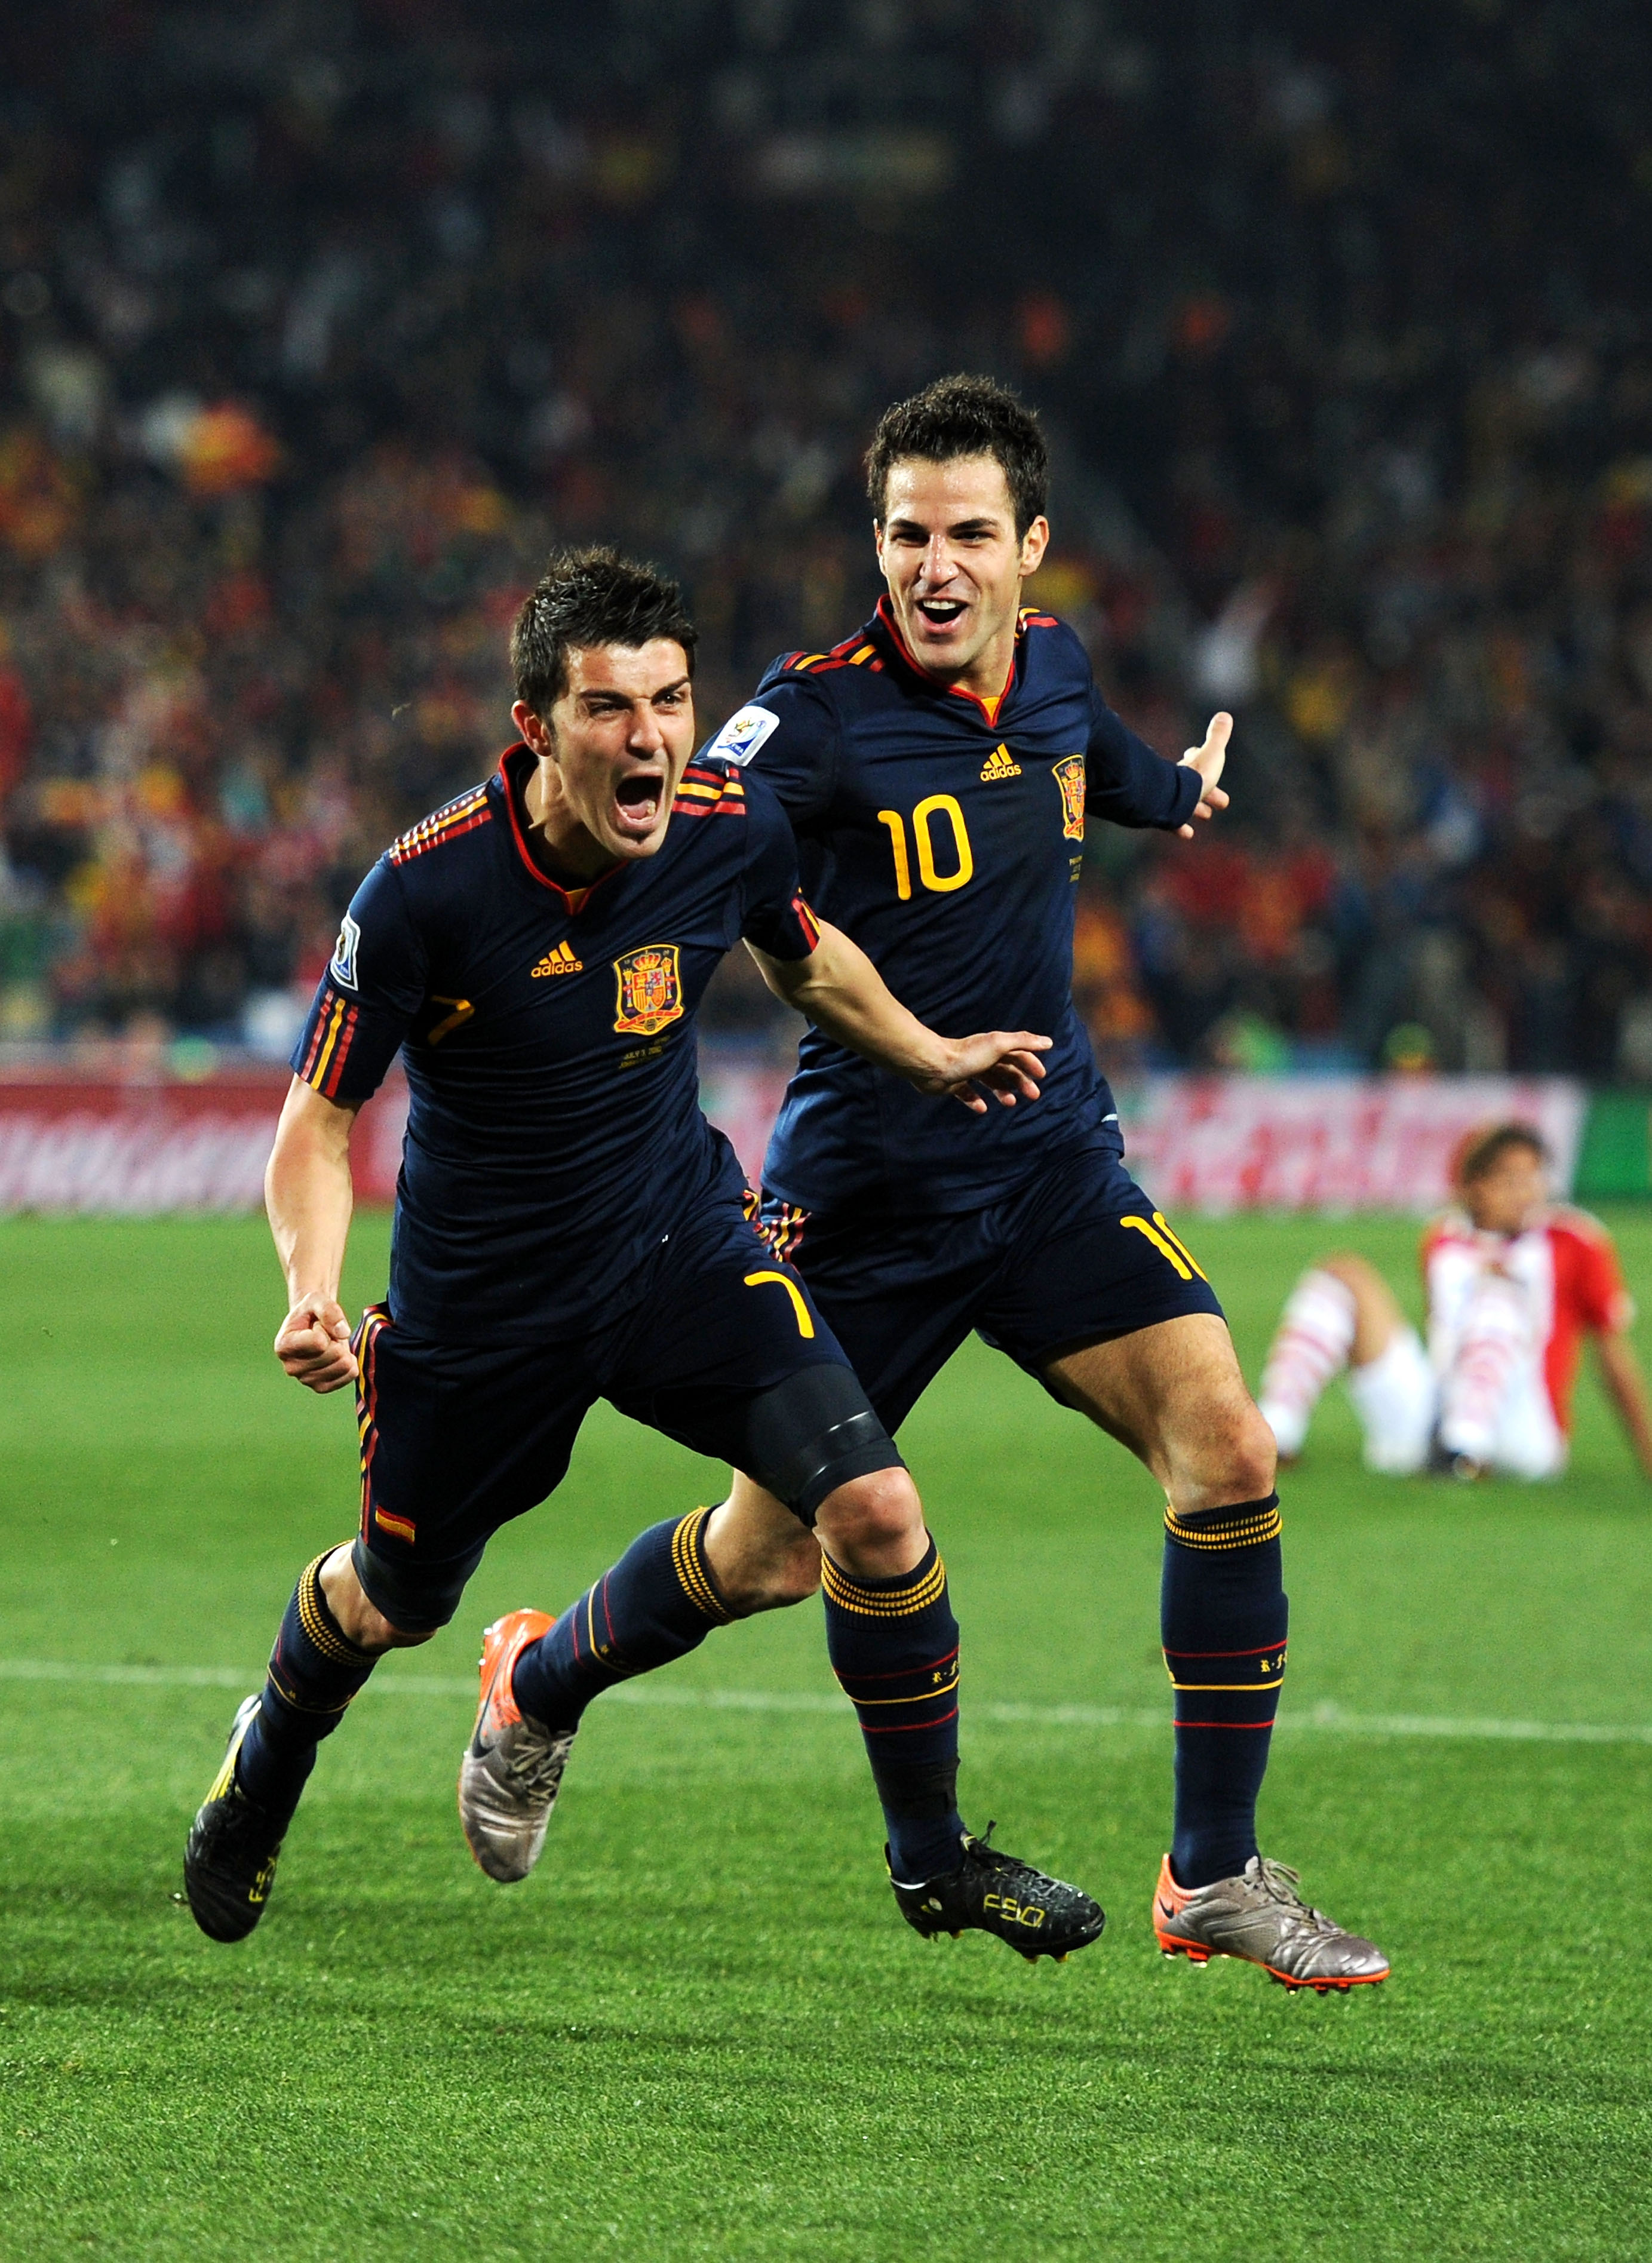 JOHANNESBURG, SOUTH AFRICA - JULY 03:  David Villa of Spain celebrates after he scores his side's first goal with team mate Francesc Fabregas (R) during the 2010 FIFA World Cup South Africa Quarter Final match between Paraguay and Spain at Ellis Park Stad